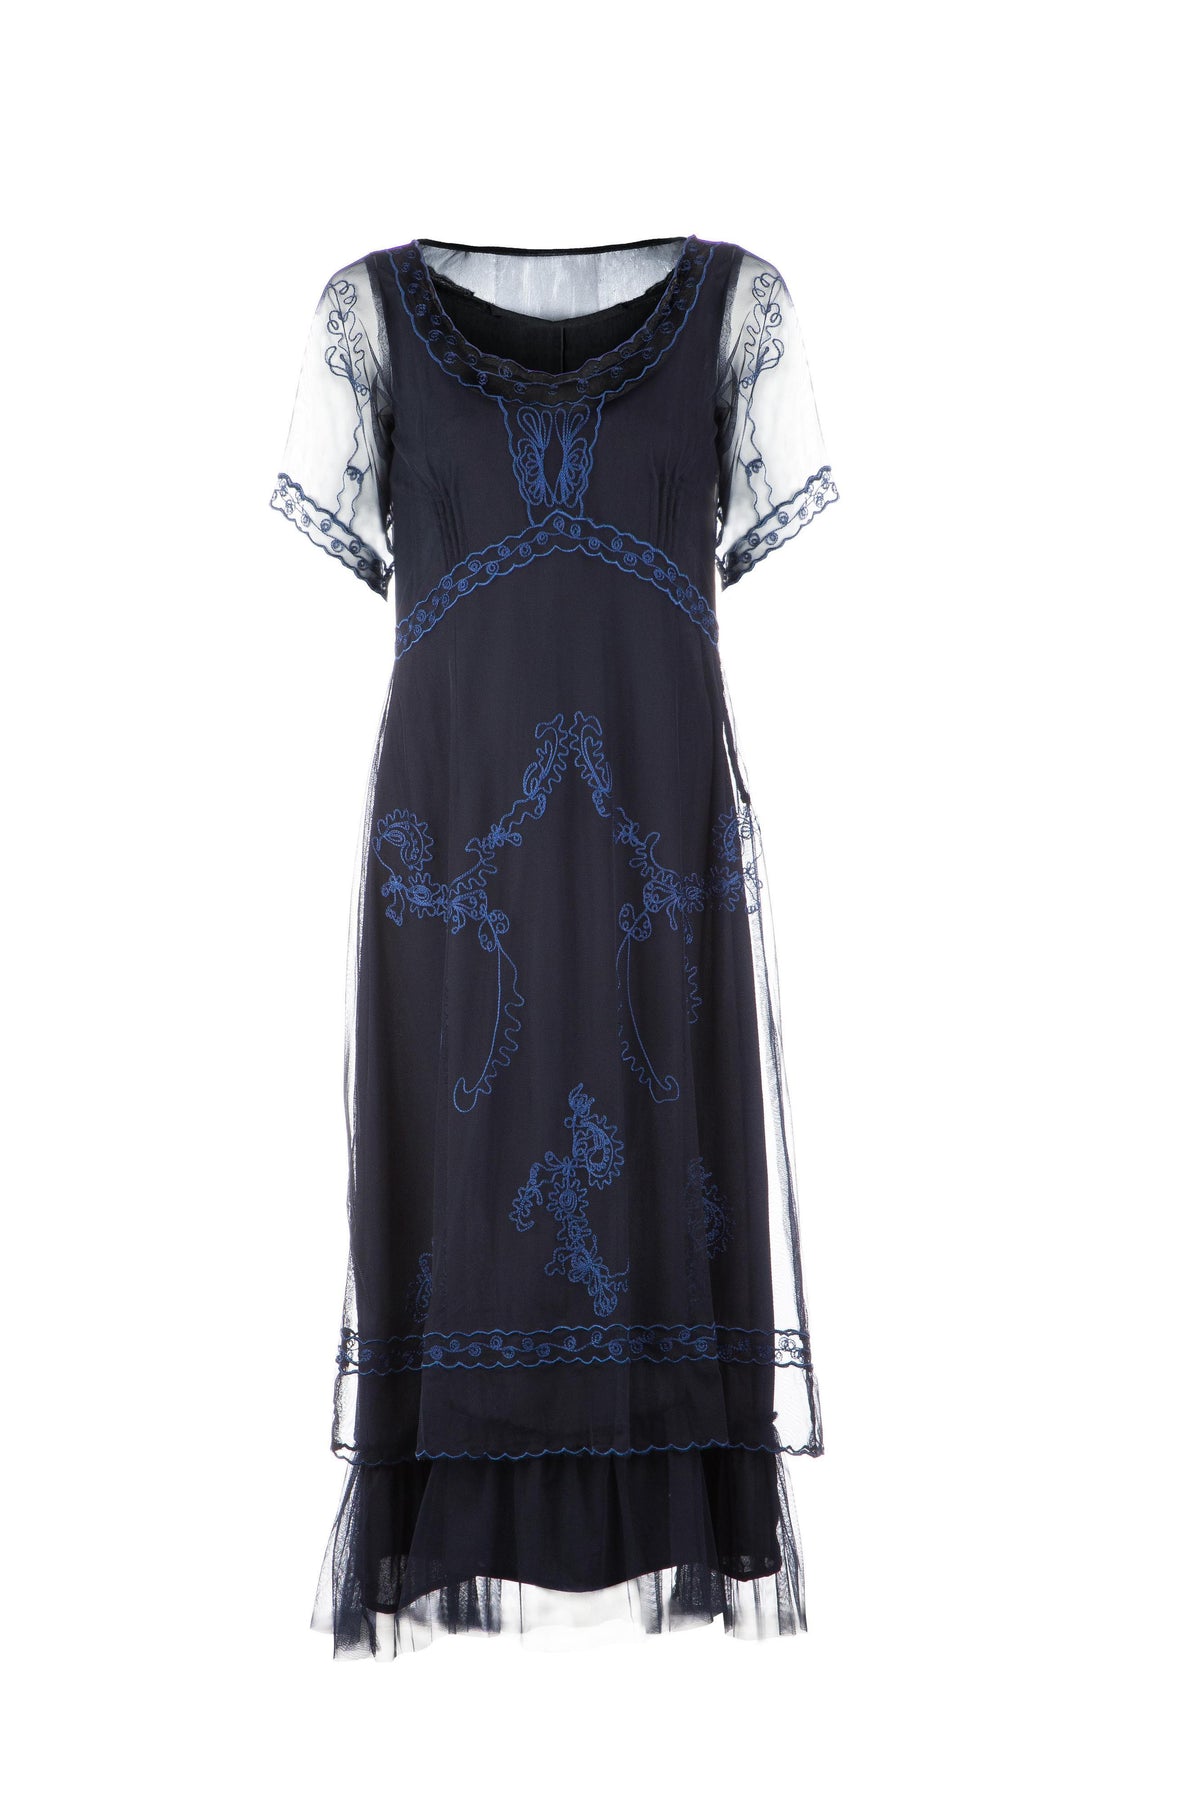 Rachel CL-168 Vintage Style Party Dress in Sapphire by Nataya ...